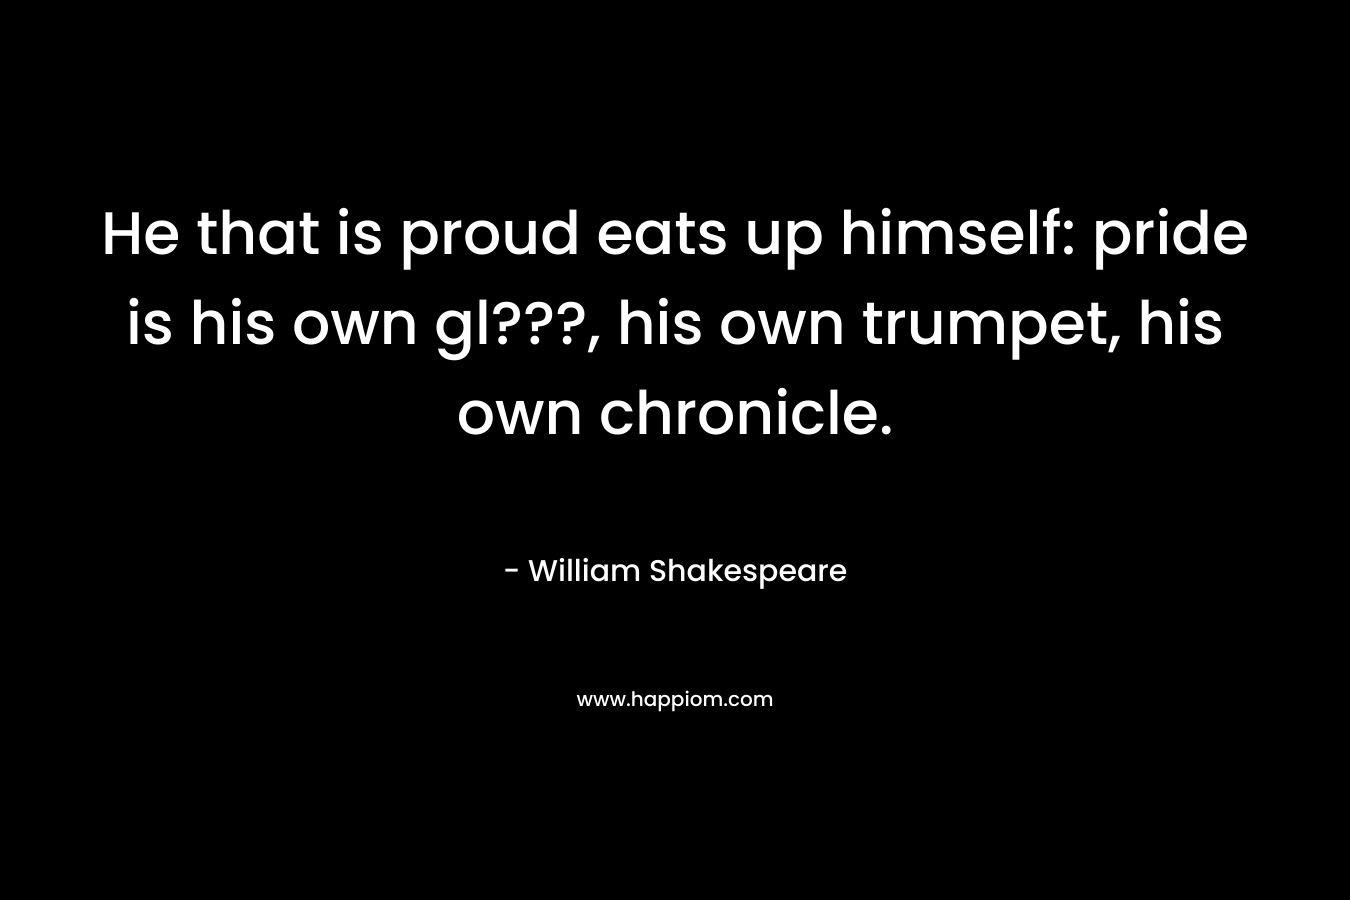 He that is proud eats up himself: pride is his own gl???, his own trumpet, his own chronicle. – William Shakespeare